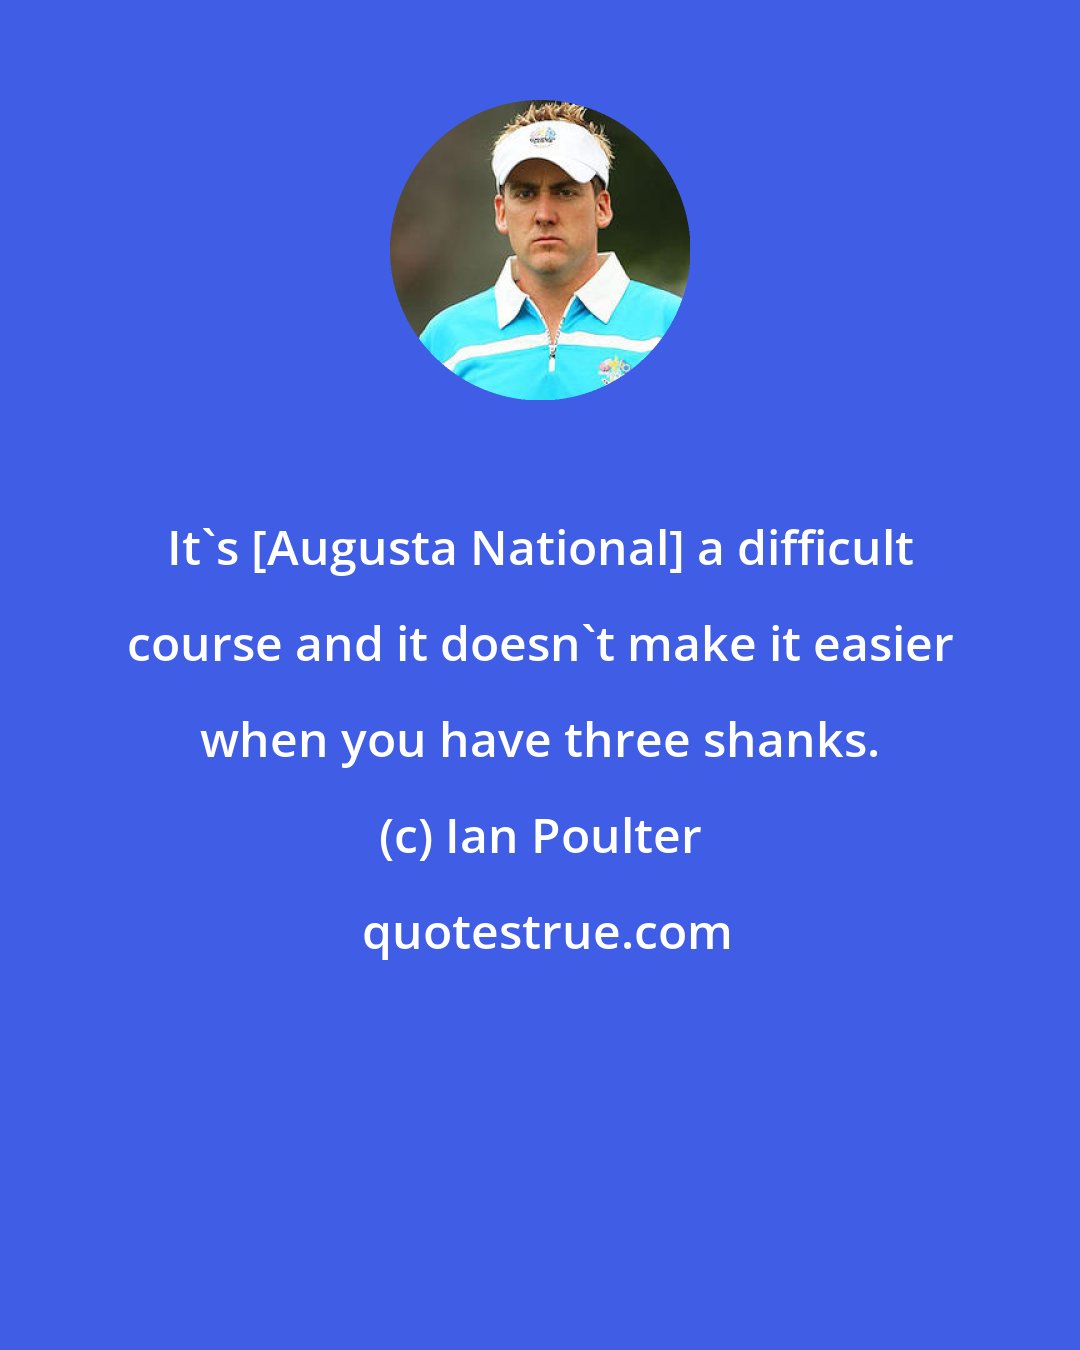 Ian Poulter: It's [Augusta National] a difficult course and it doesn't make it easier when you have three shanks.